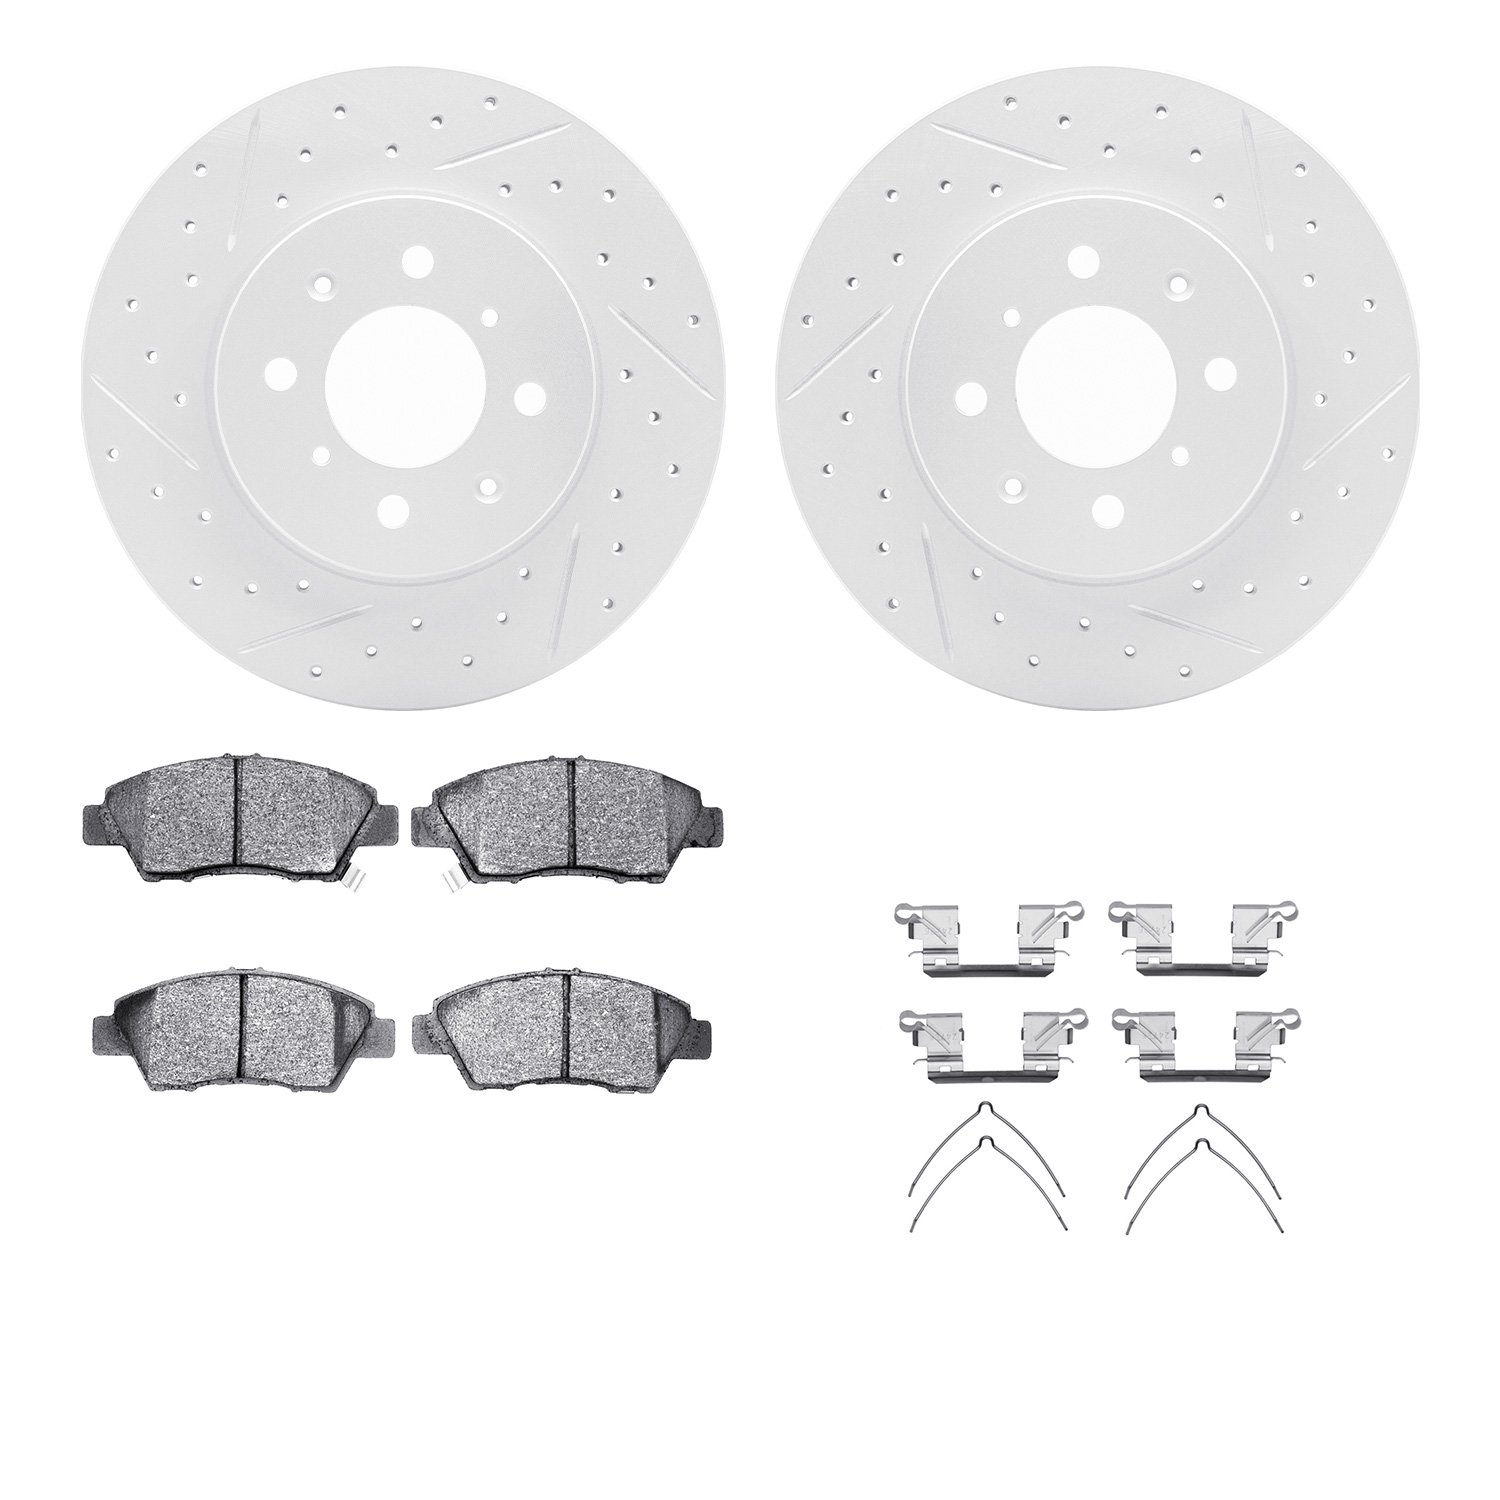 2512-59011 Geoperformance Drilled/Slotted Rotors w/5000 Advanced Brake Pads Kit & Hardware, 2009-2014 Acura/Honda, Position: Fro